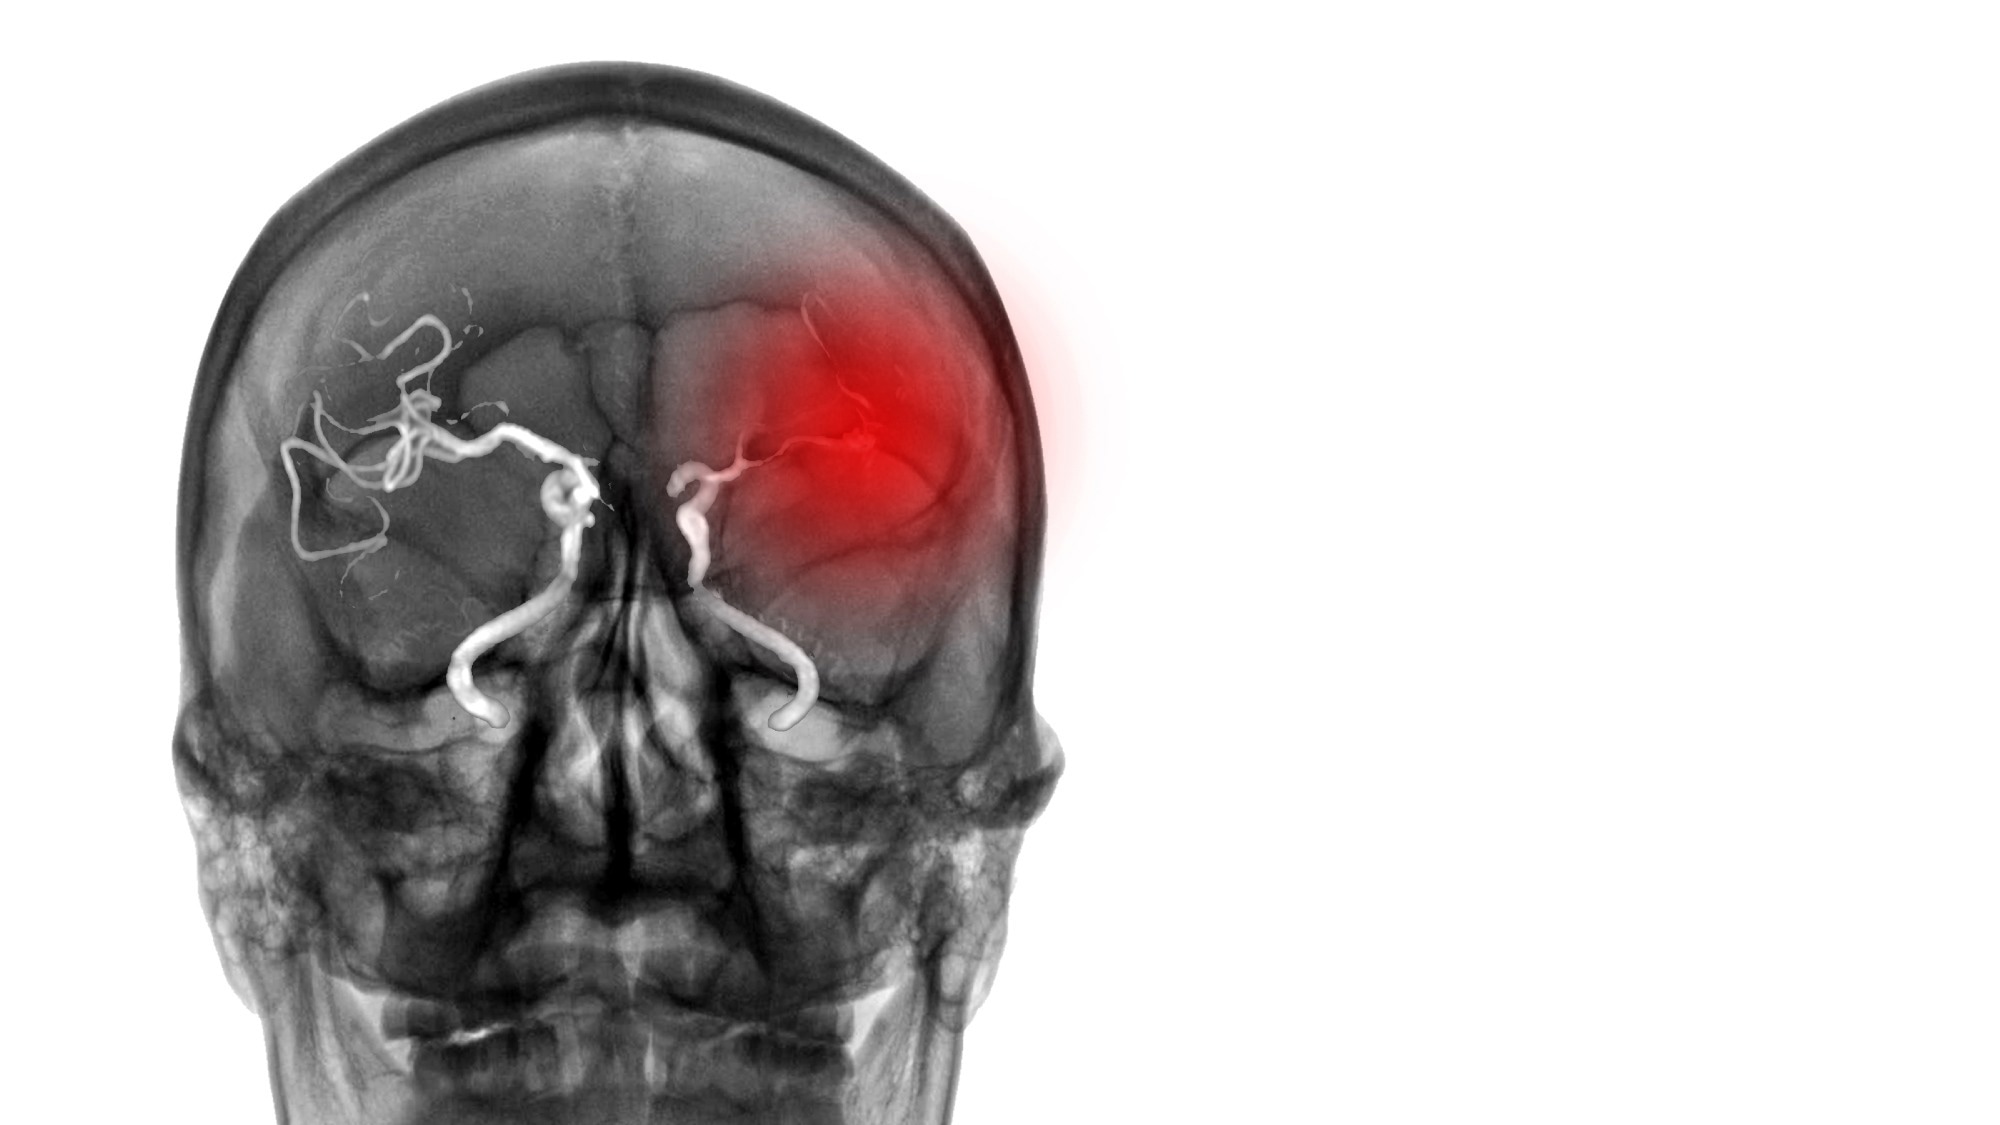 Study: SARS-CoV-2 Infection and Increased Risk for Pediatric Stroke. Image Credit: joel bubble ben/Shutterstock